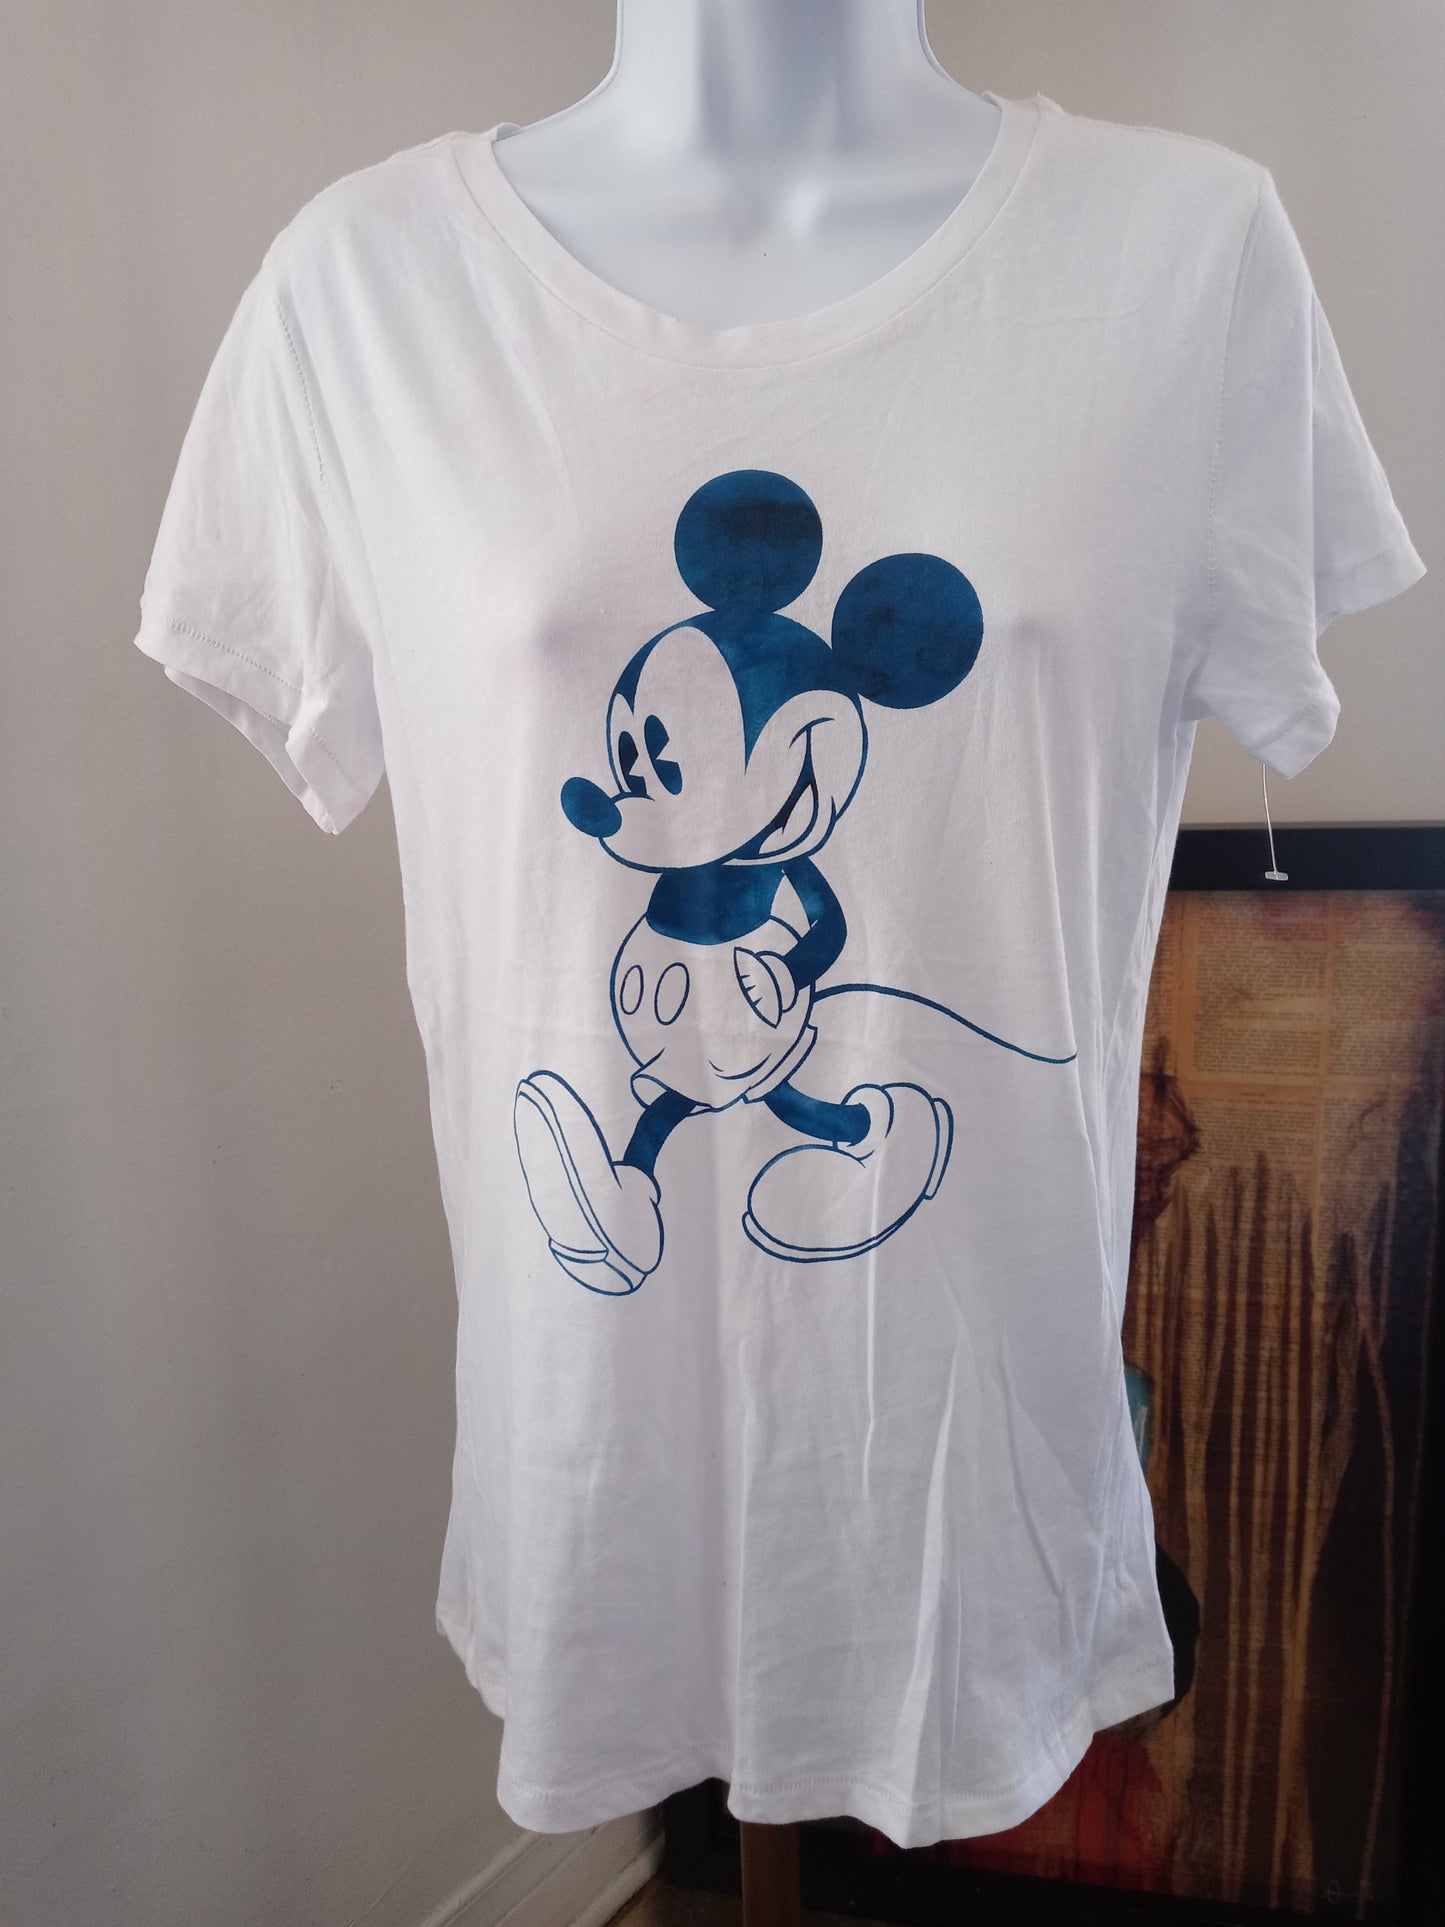 H&M Disney L.O.G.G Label Of Graded Goods Mickey Mouse Women's T Shirt